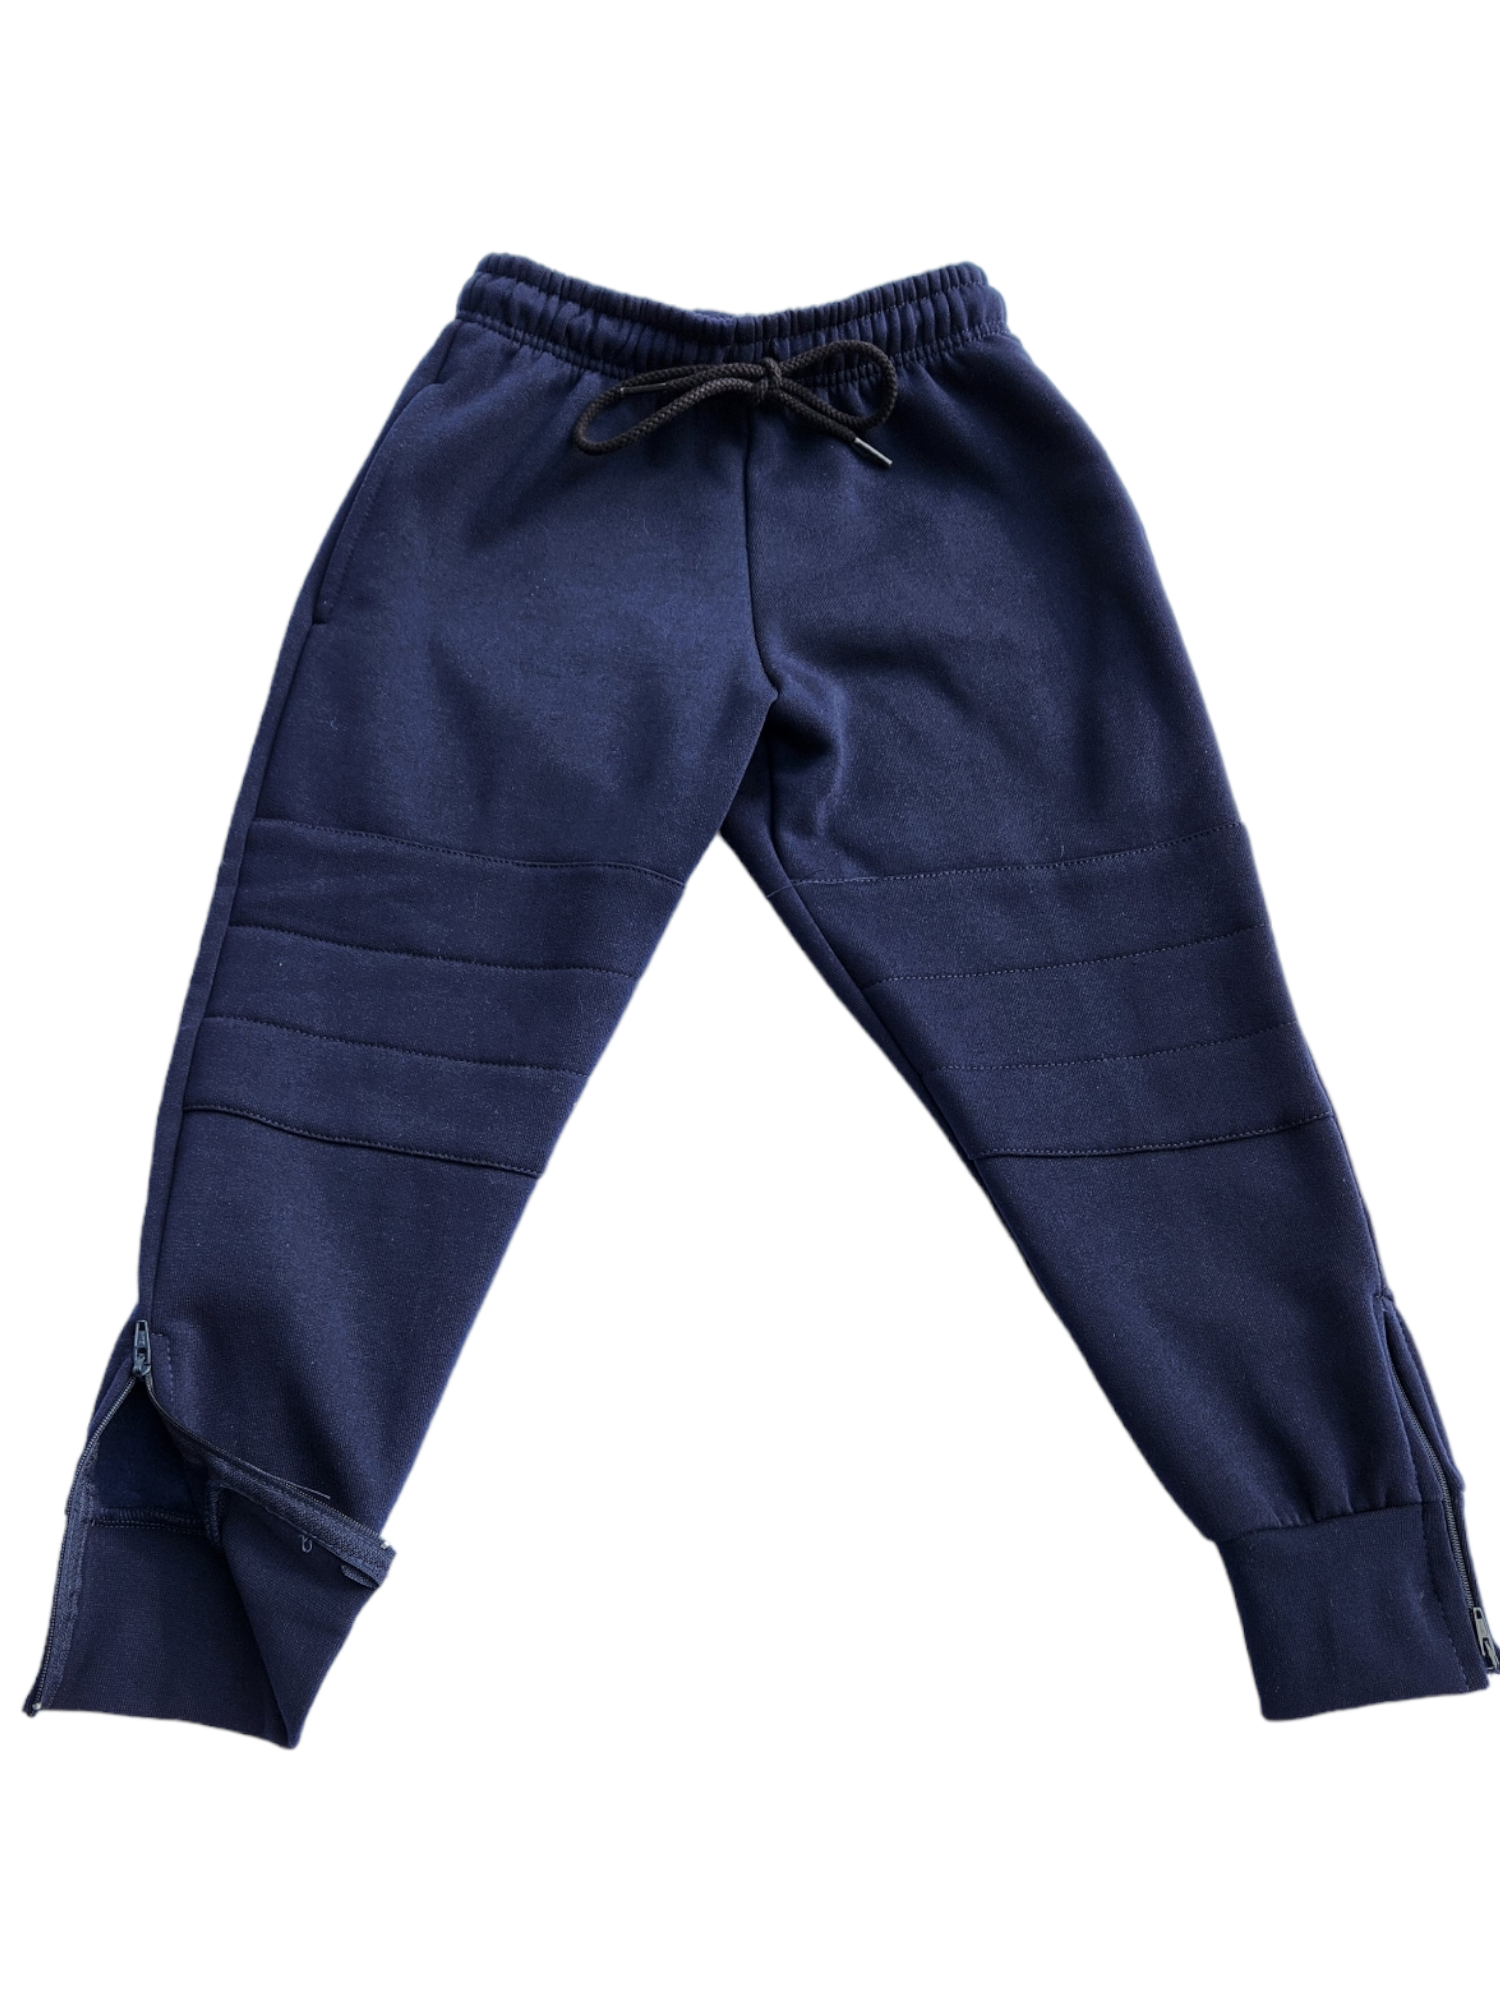 Navy blue cotton fleece track pants with drawstring adjustable waist, knee padding and zips at ankles